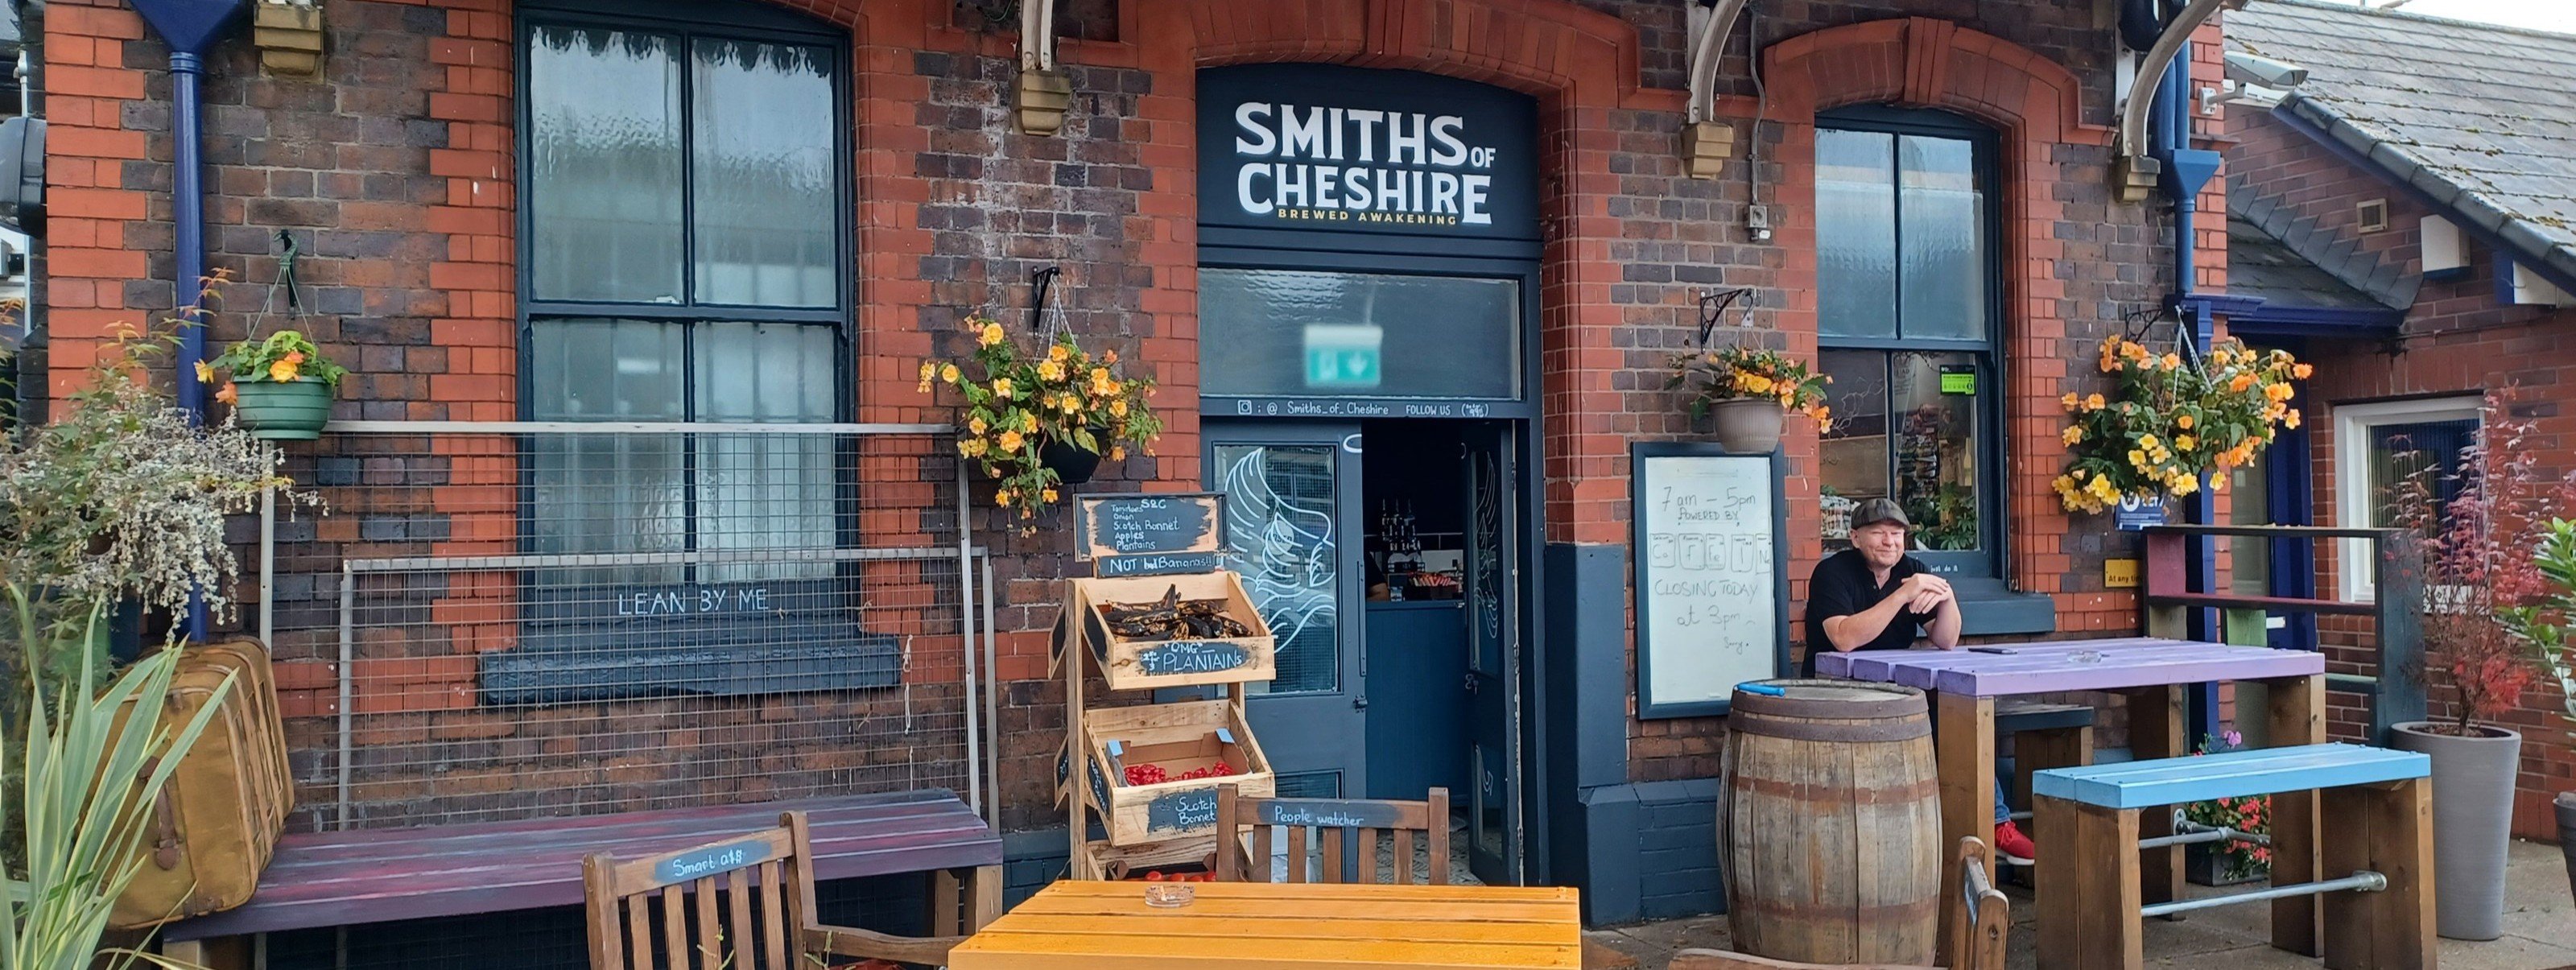 smiths-of-cheshire-wilmslow